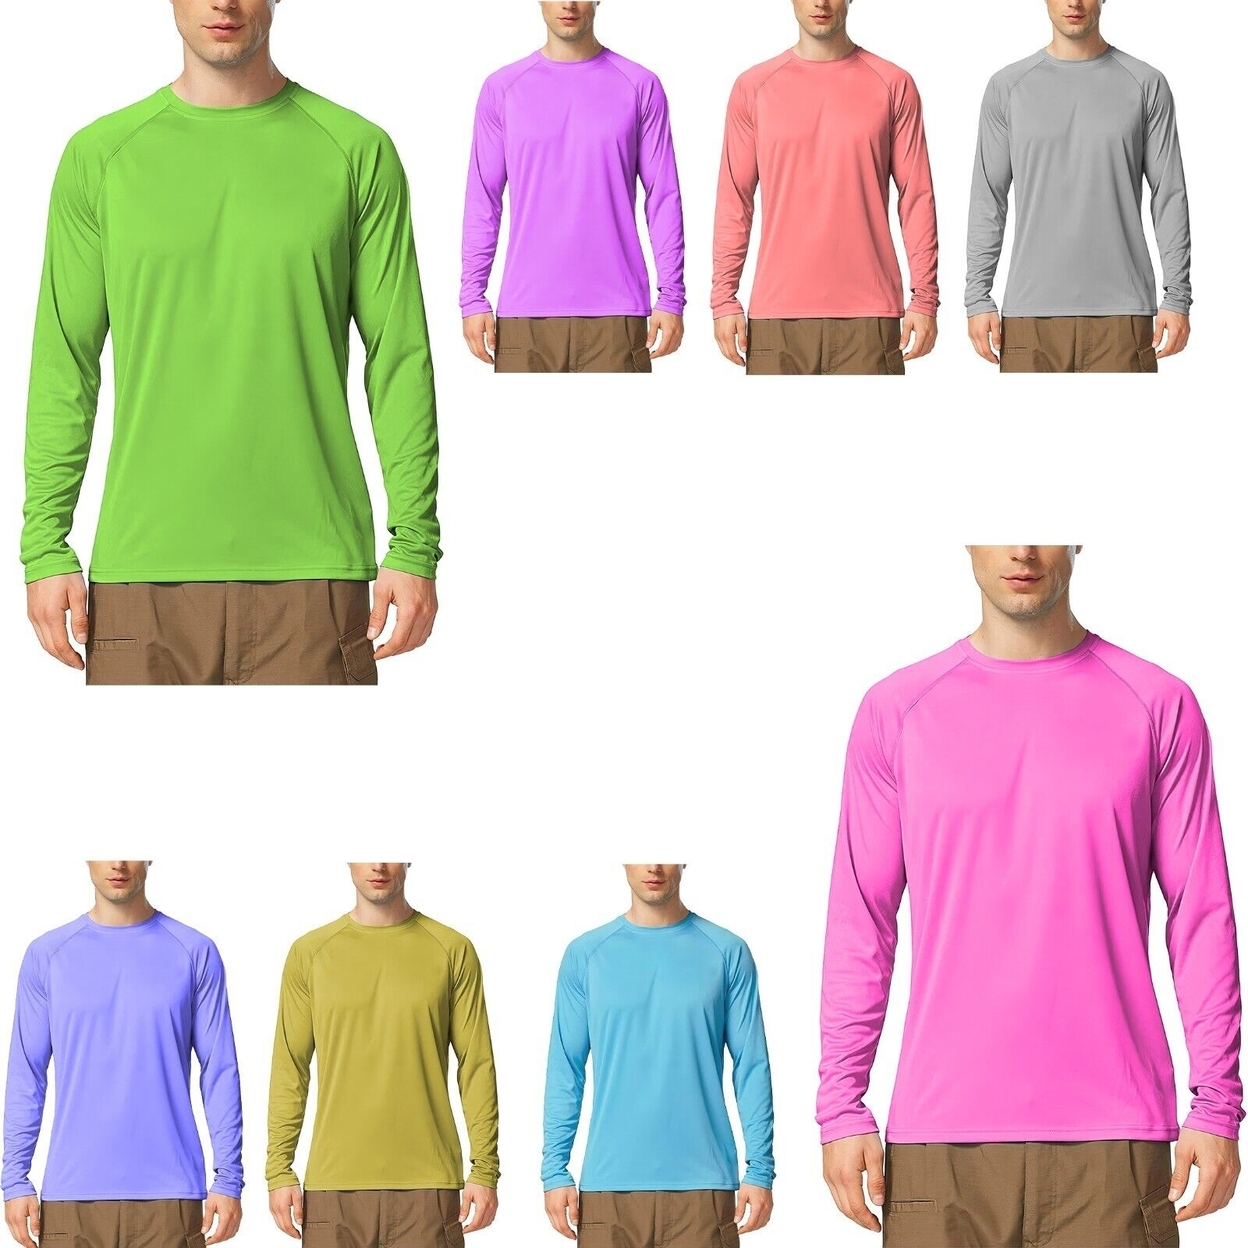 6-Pack: Men's Dri-Fit Moisture Wicking Athletic Cool Performance Slim Fit Long Sleeve T-Shirts - Small